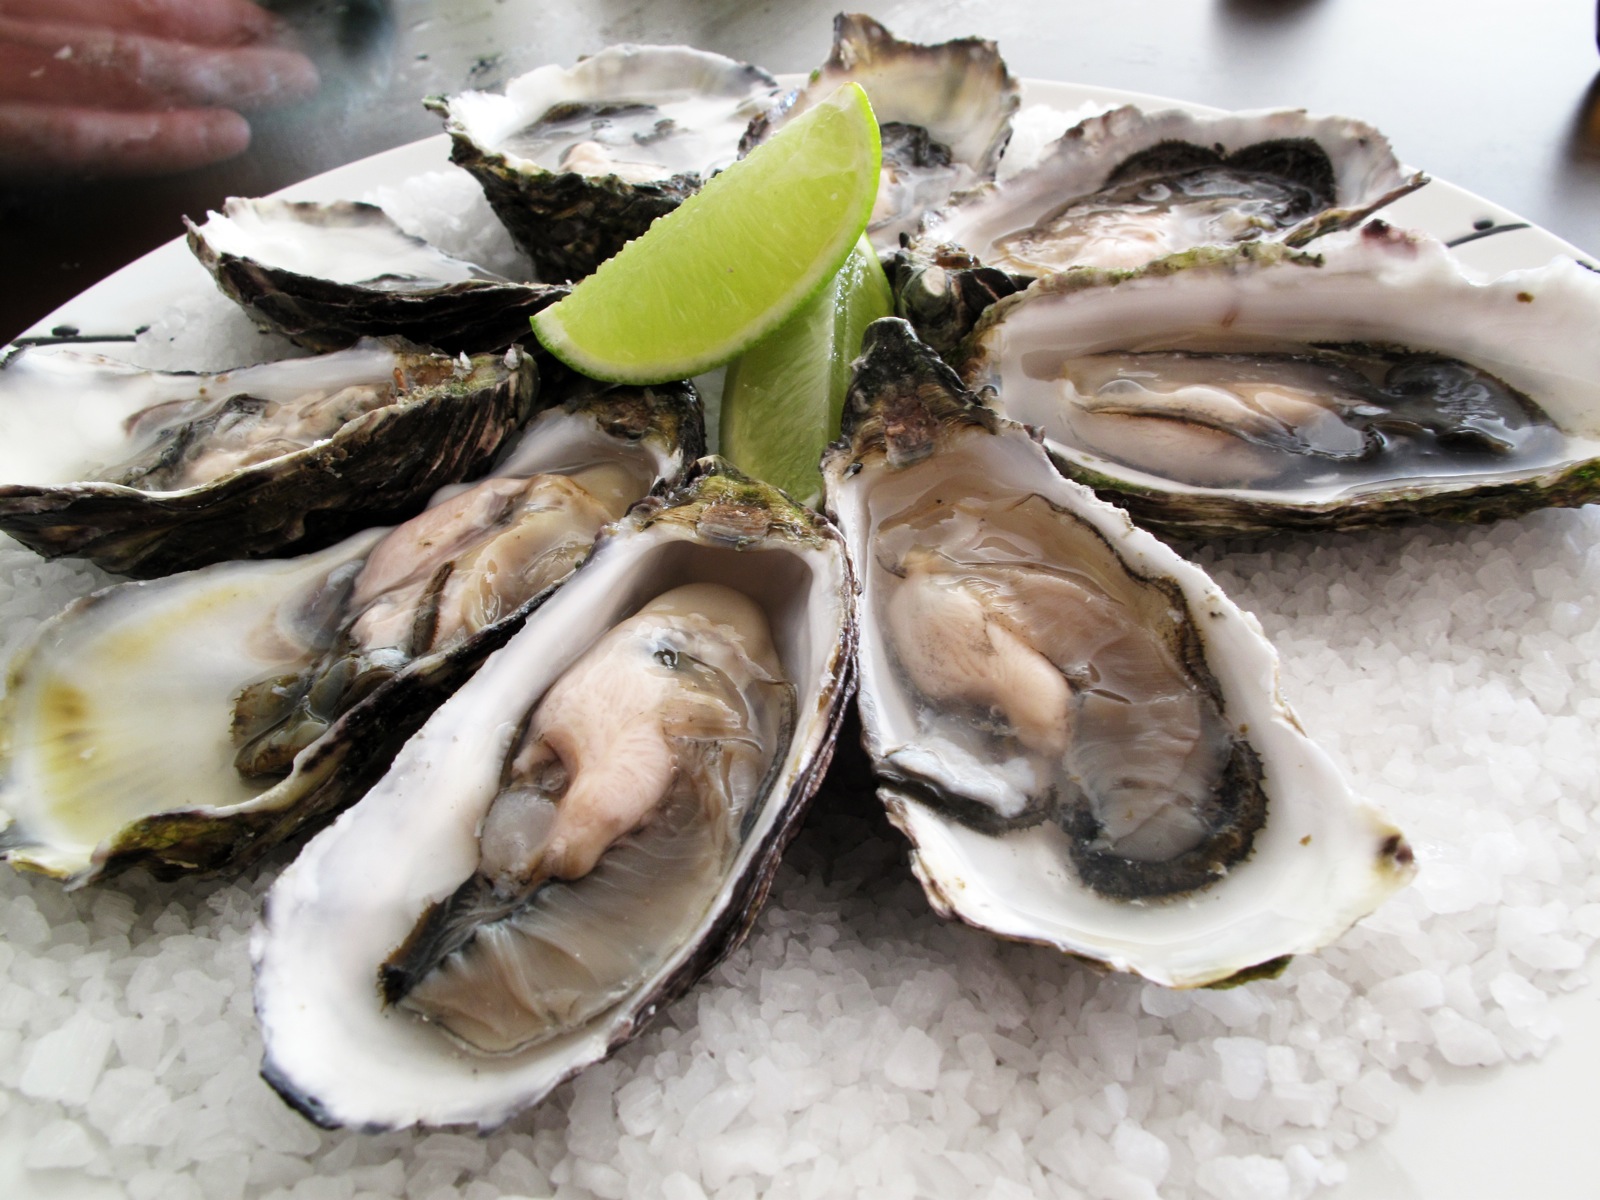 Some Pacific oysters on a plate | Eye on the ICR